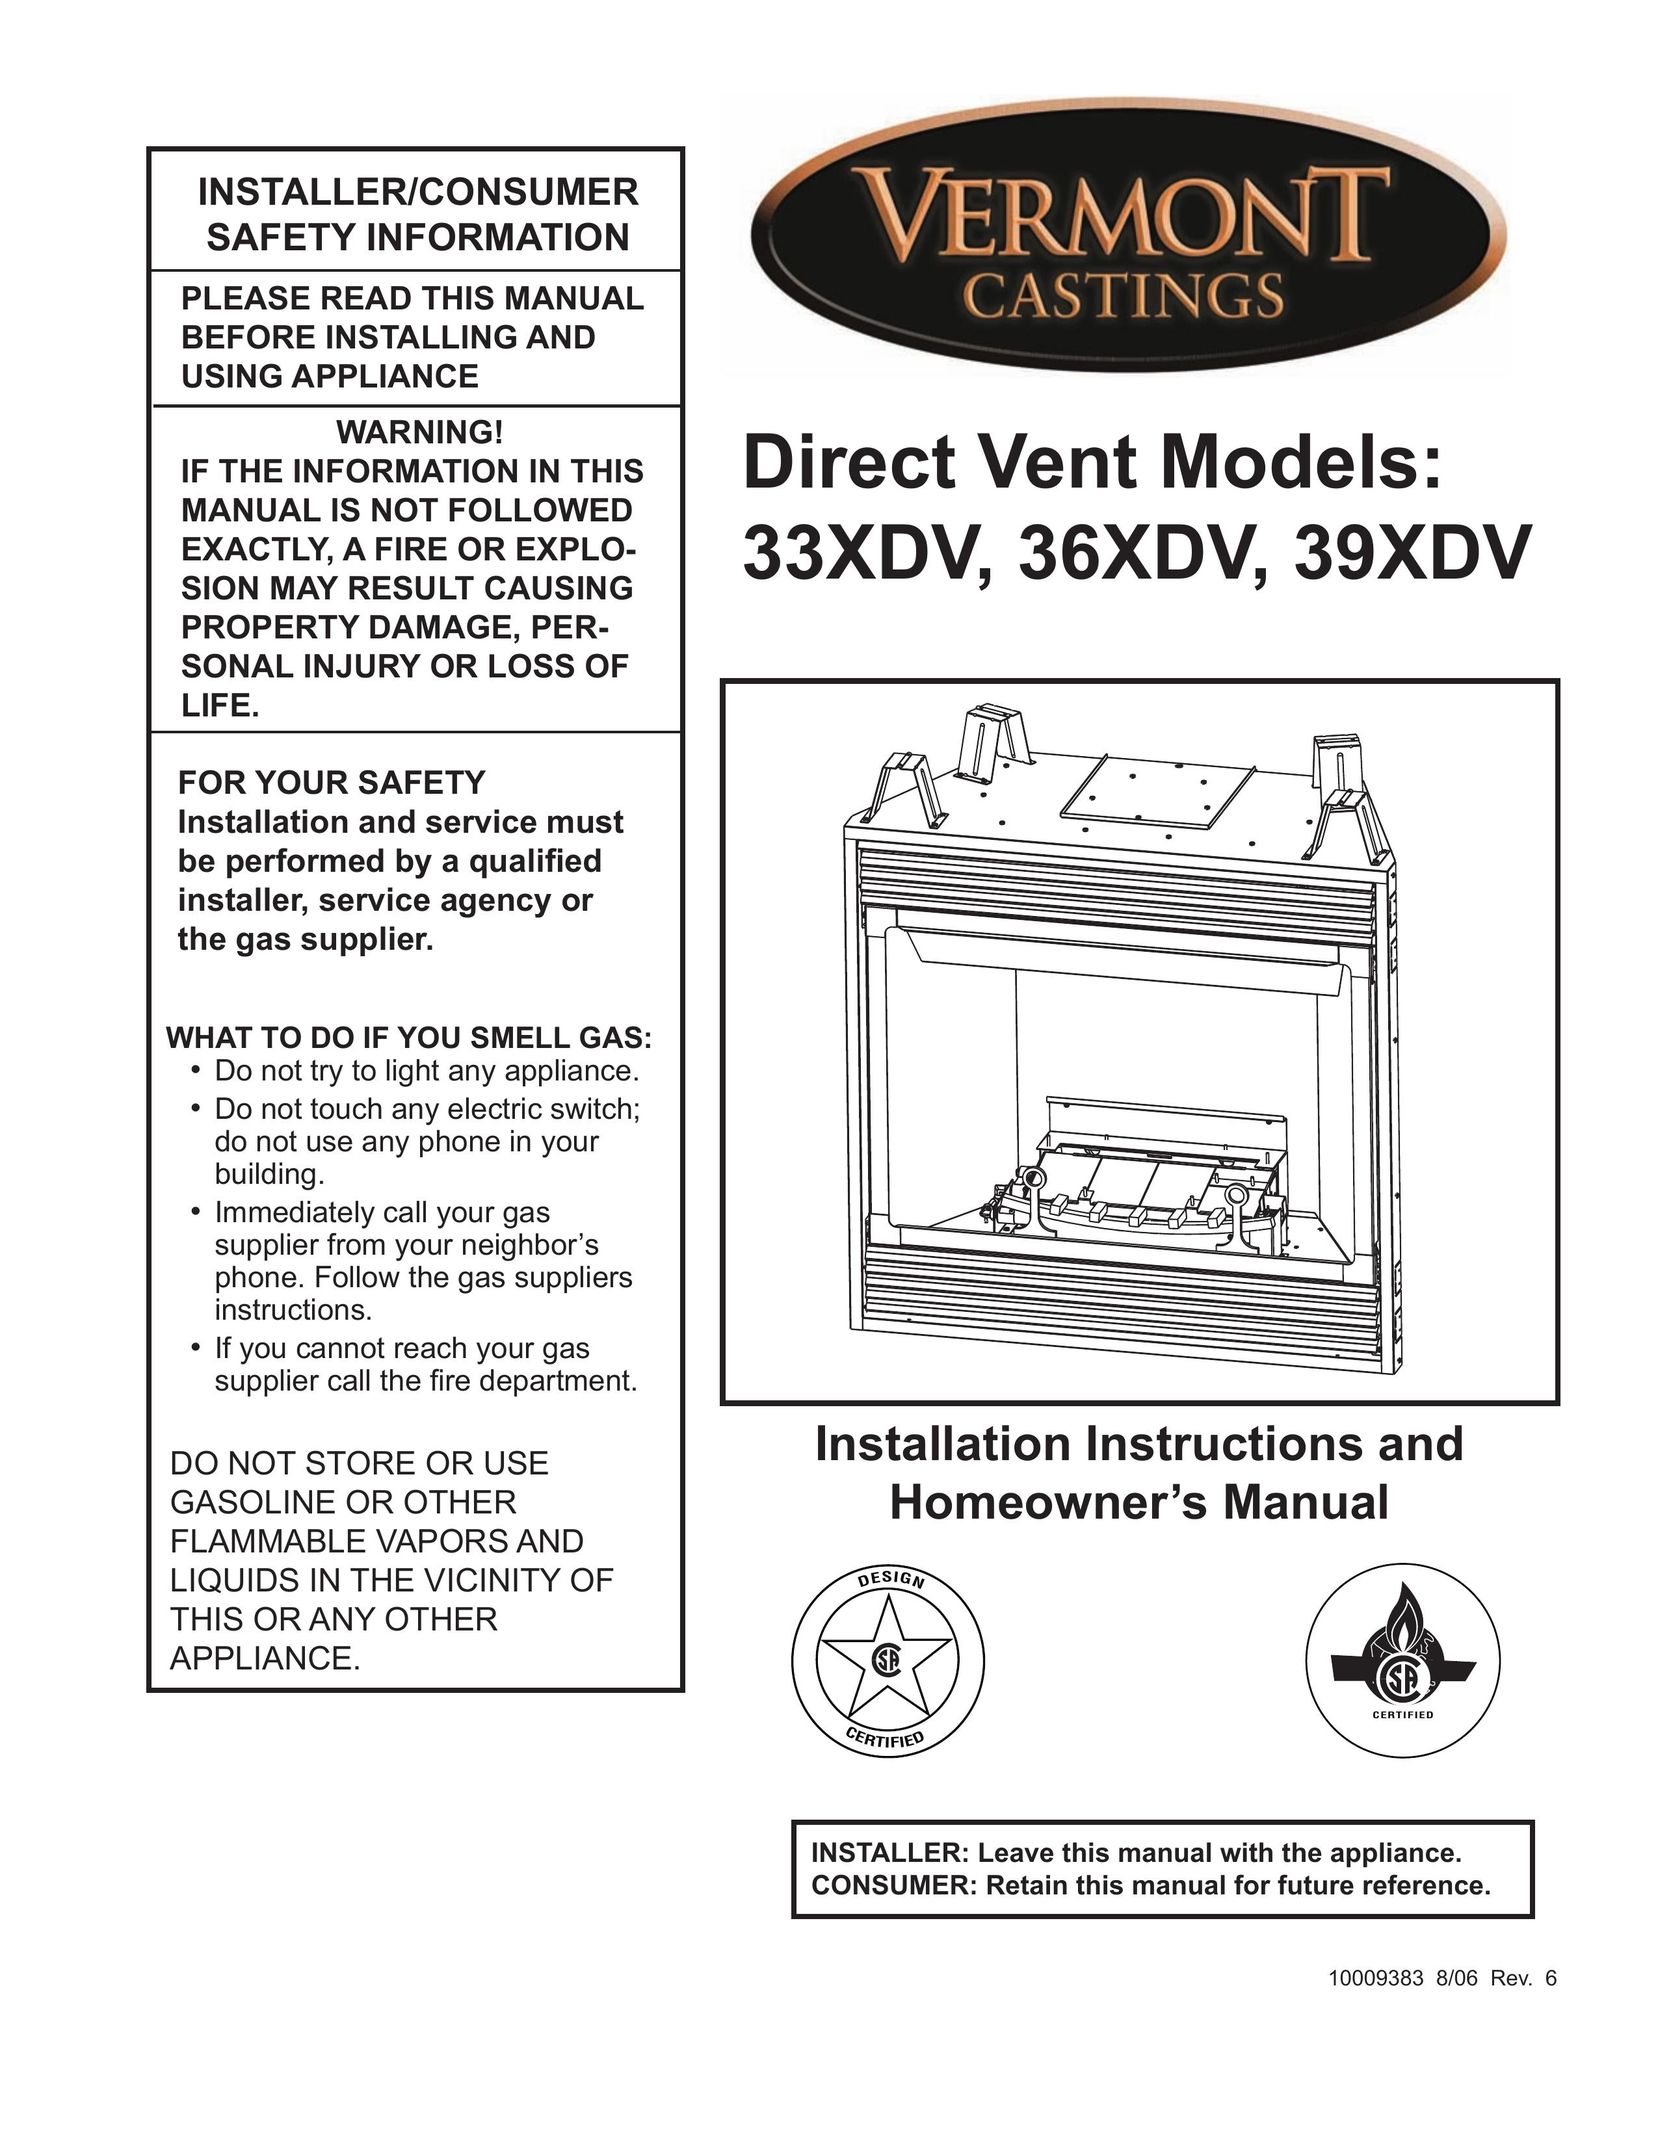 Vermont Casting 36XDV Indoor Fireplace User Manual